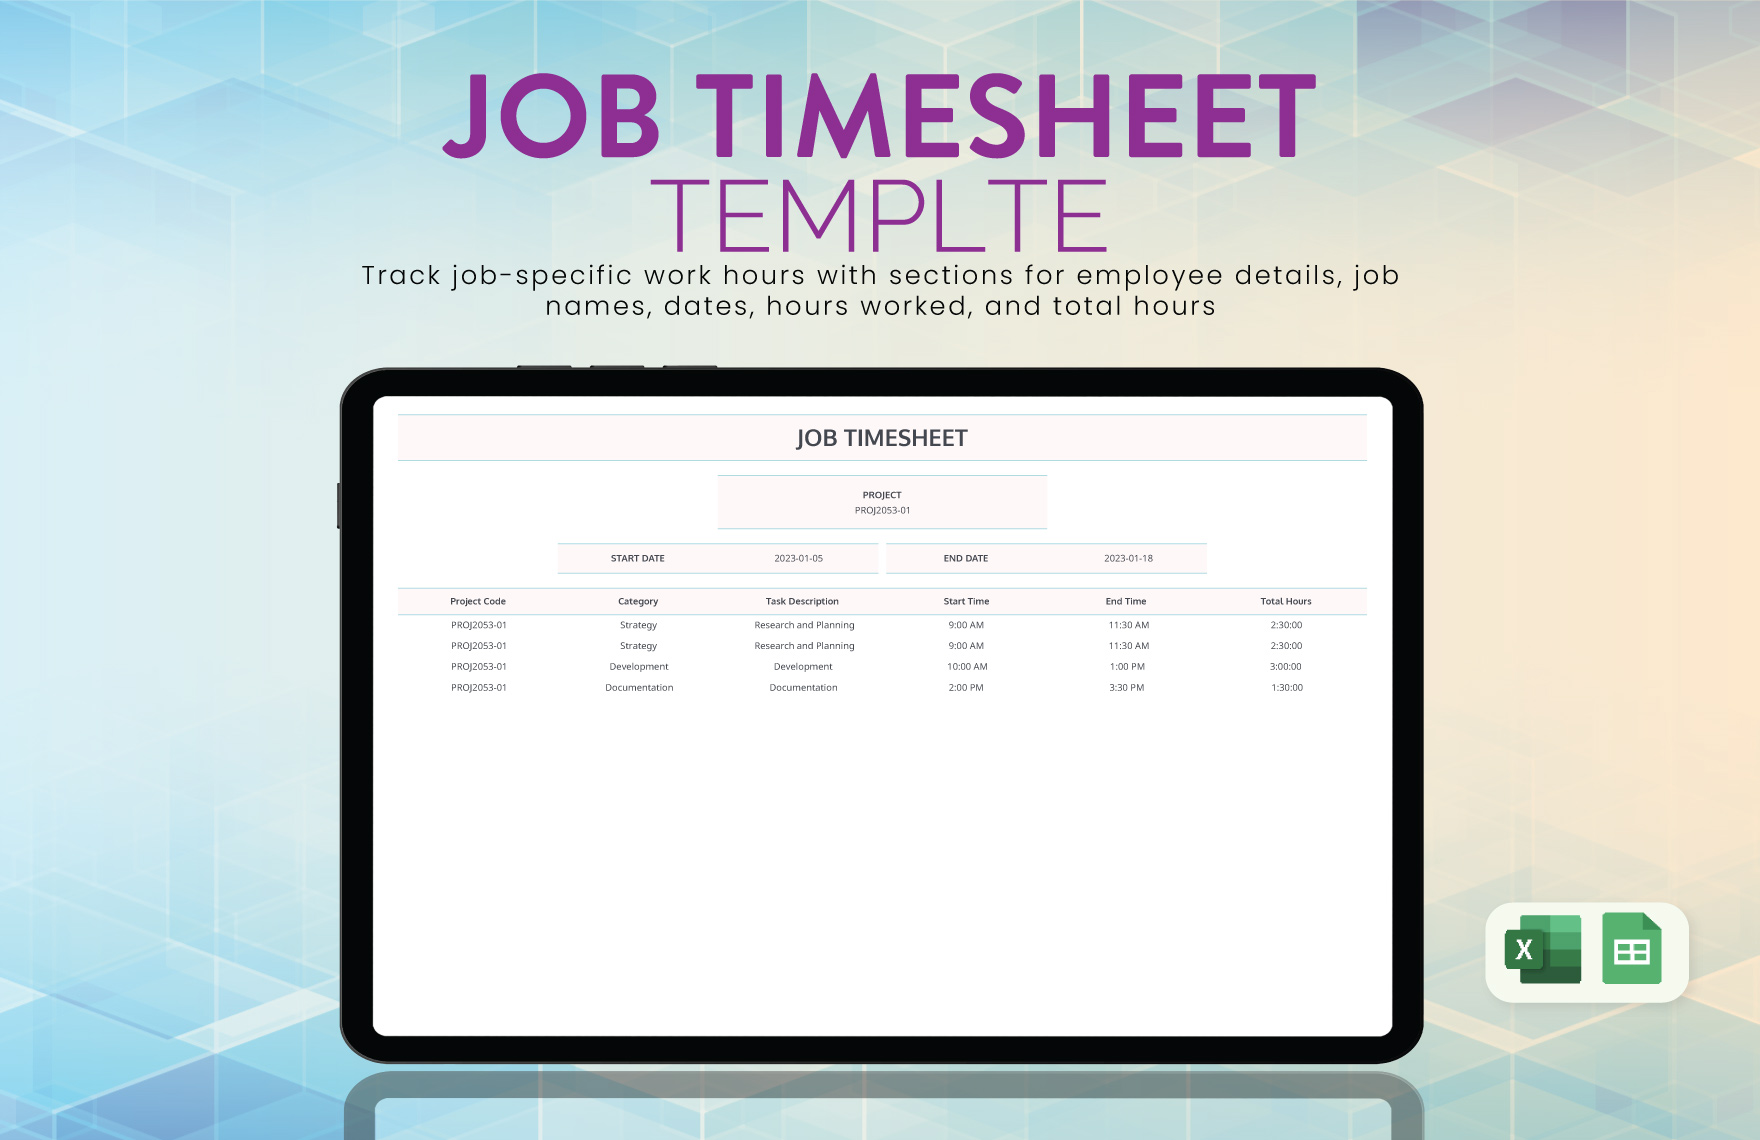 Job Timesheet Template in Excel, Google Sheets